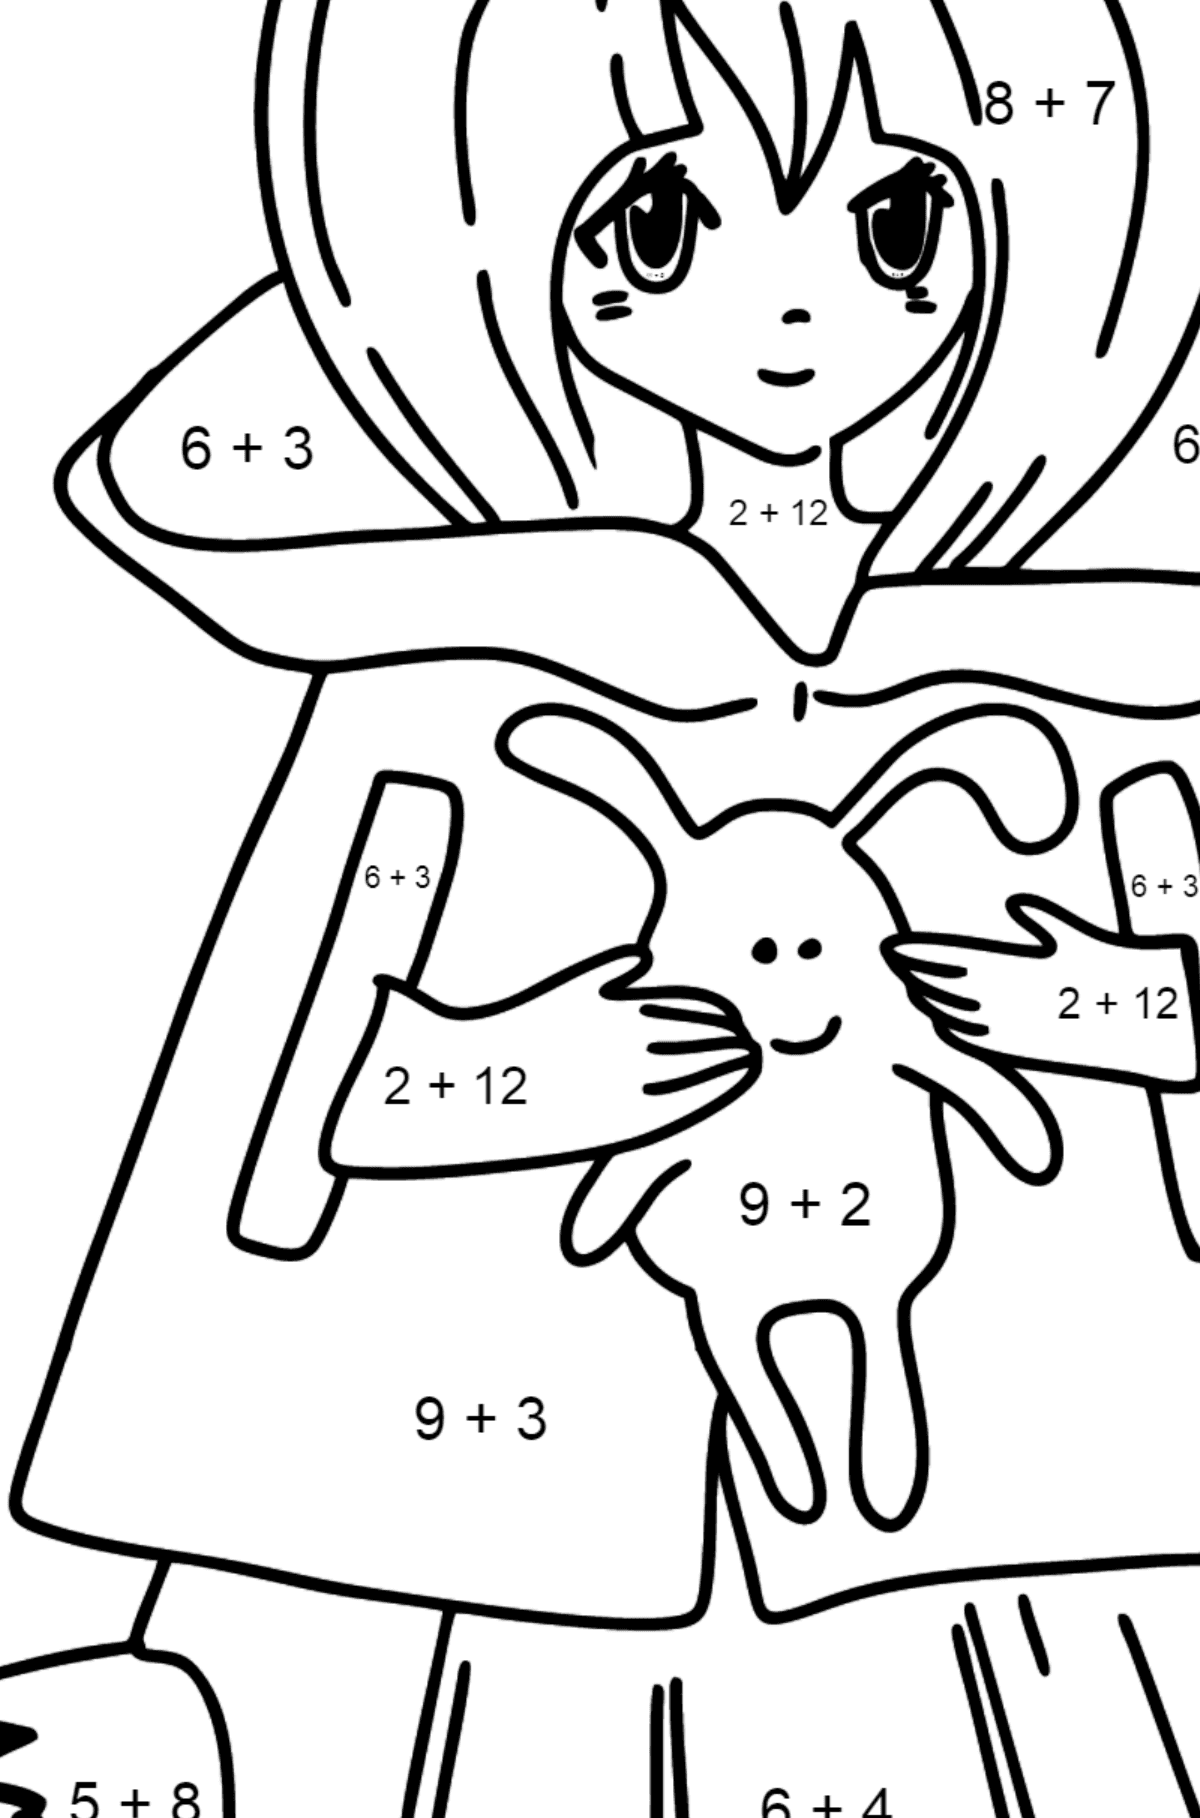 Anime Girl with Tail coloring page - Math Coloring - Addition for Kids